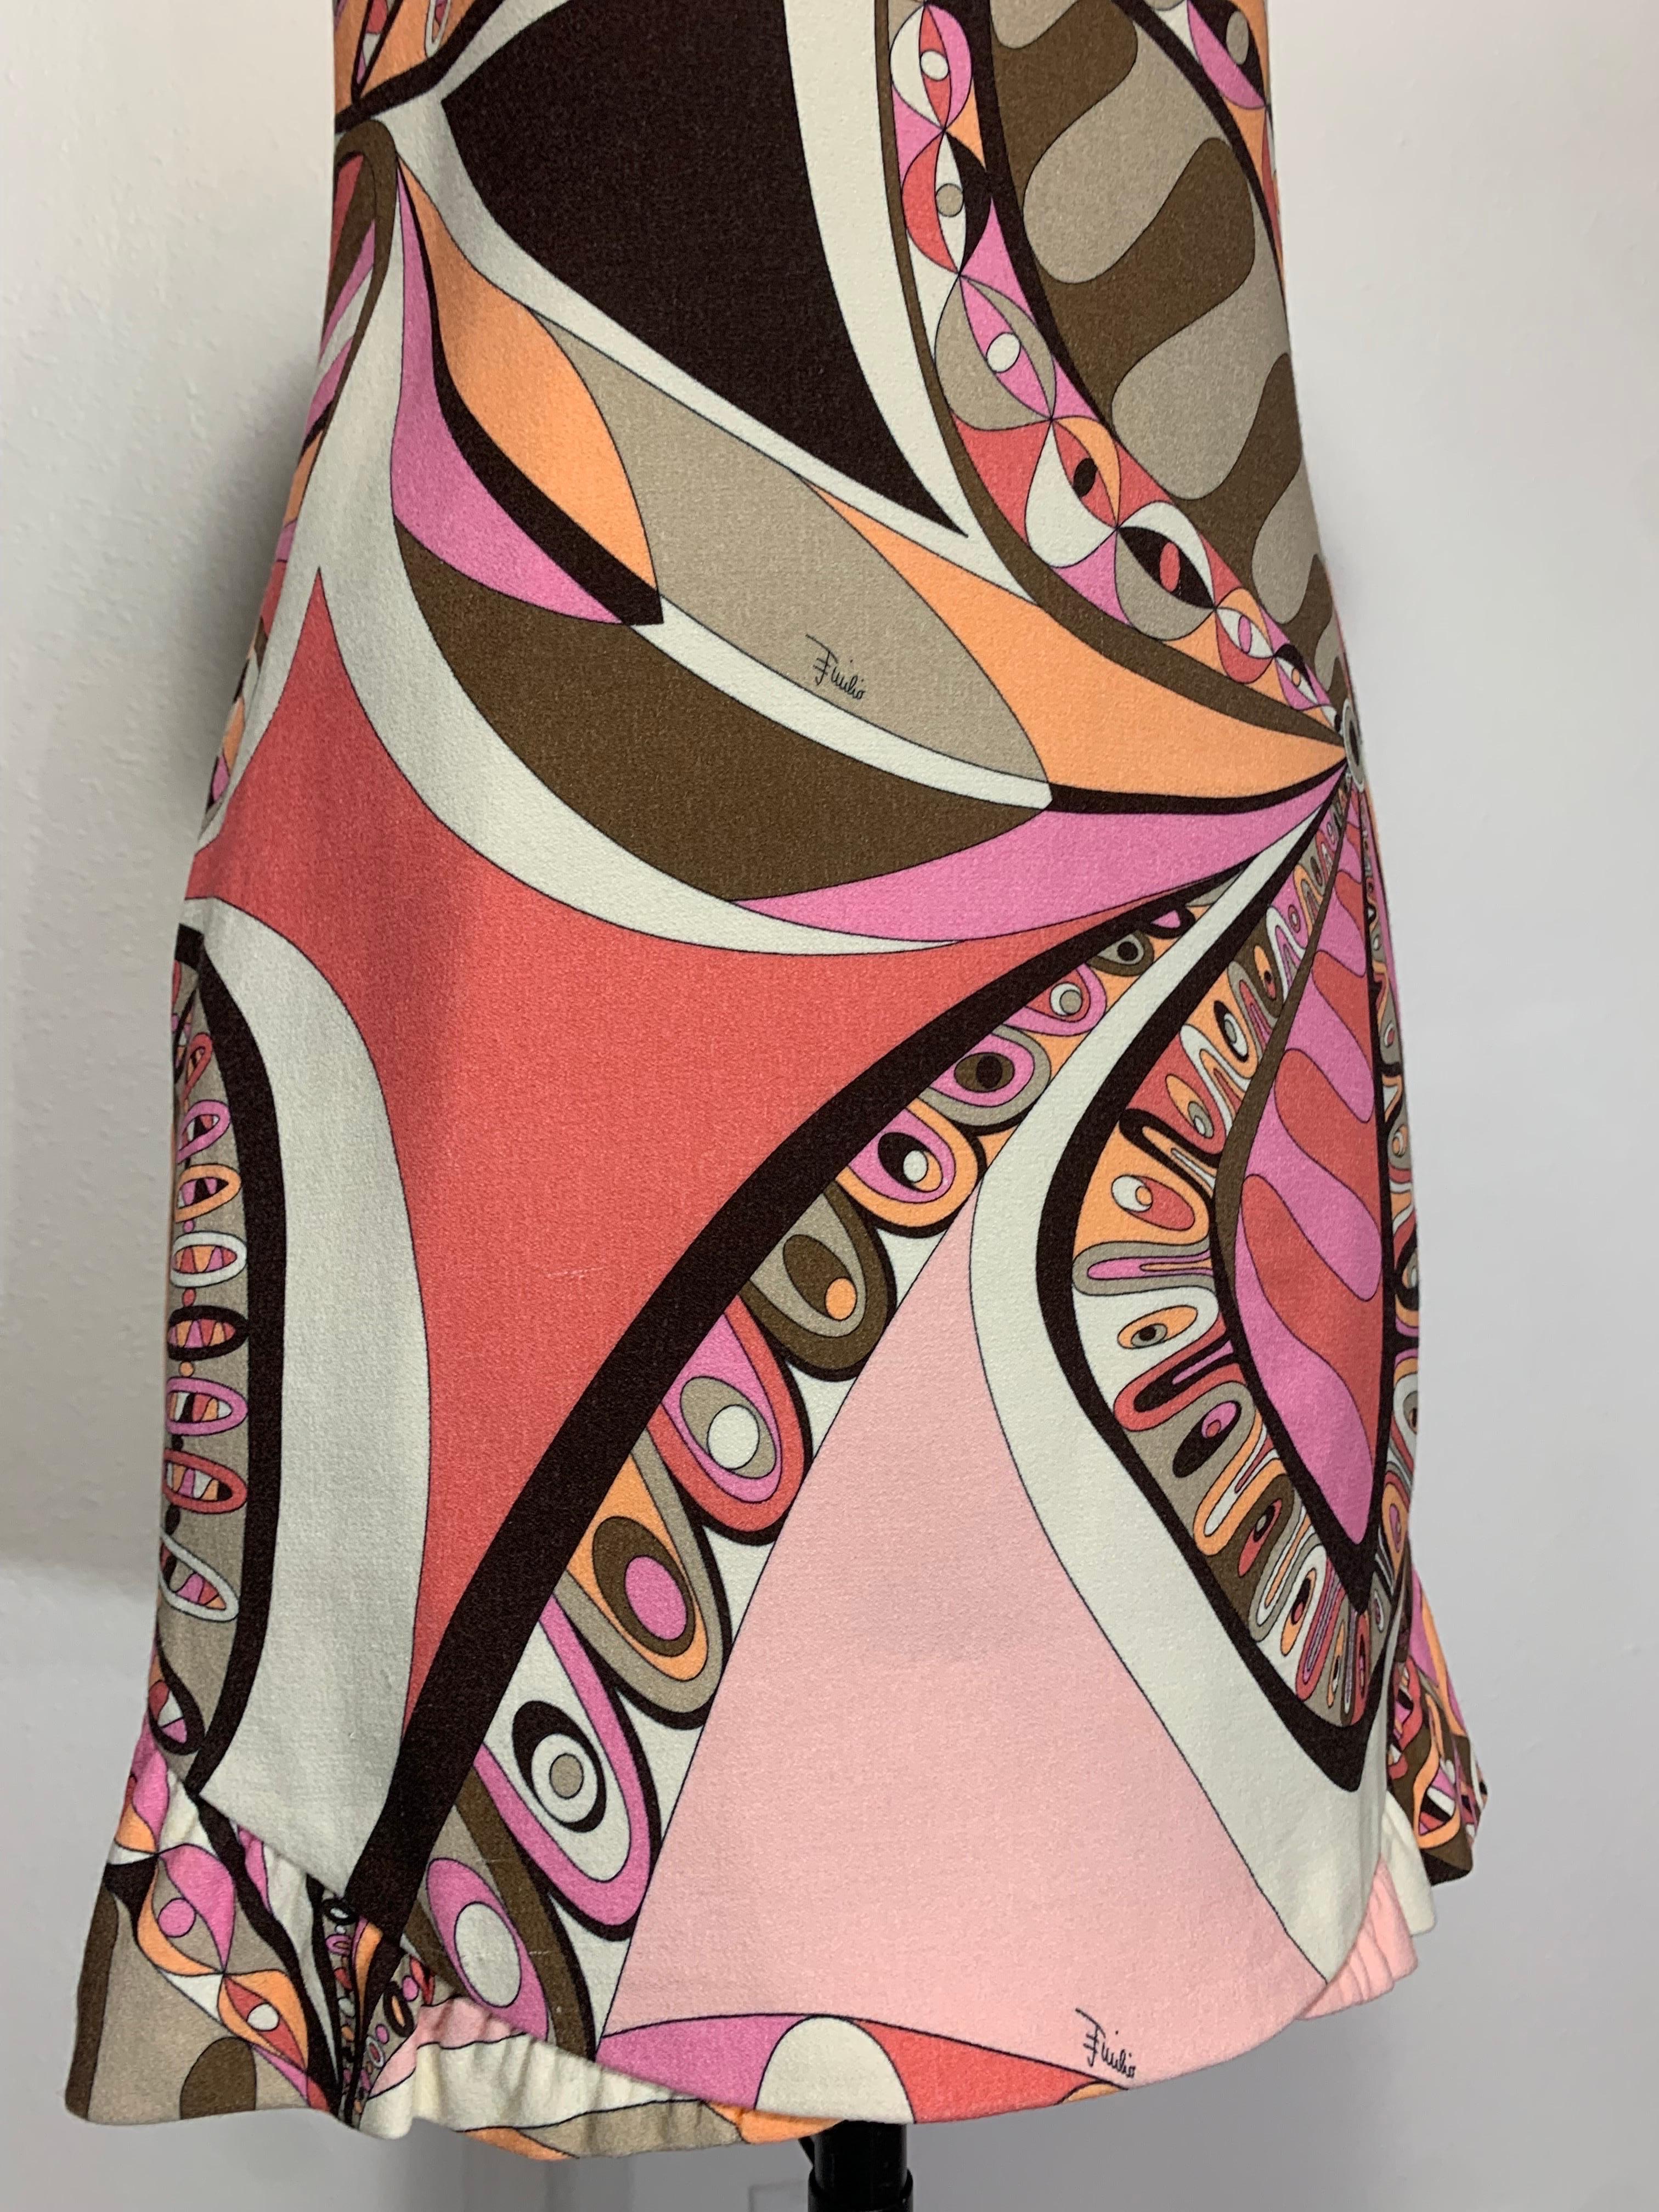 Contemporary Emilio Pucci Mod-Style Short-Sleeved Day Dress in Taupe Pink Print For Sale 11